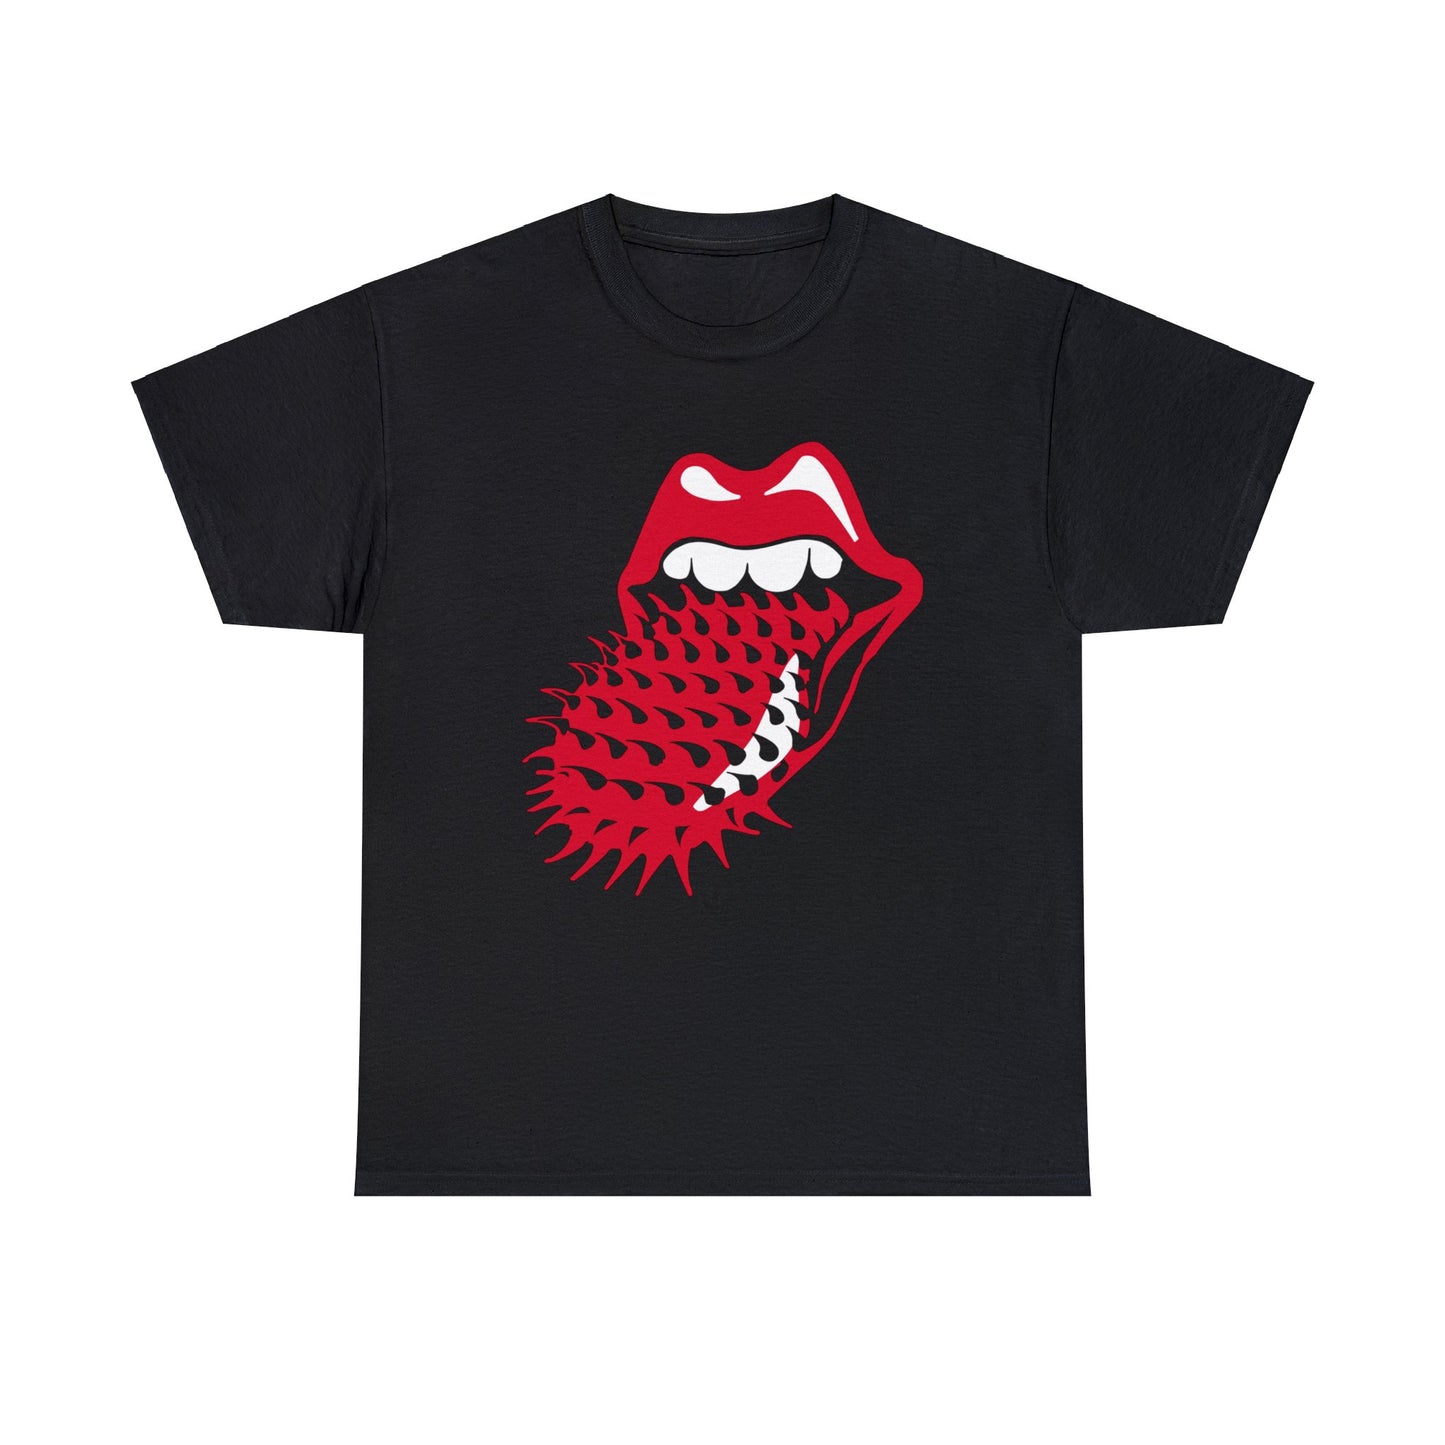 Rolling Stones Voodoo Lounge Tour 1994-95 T-shirt for Sale